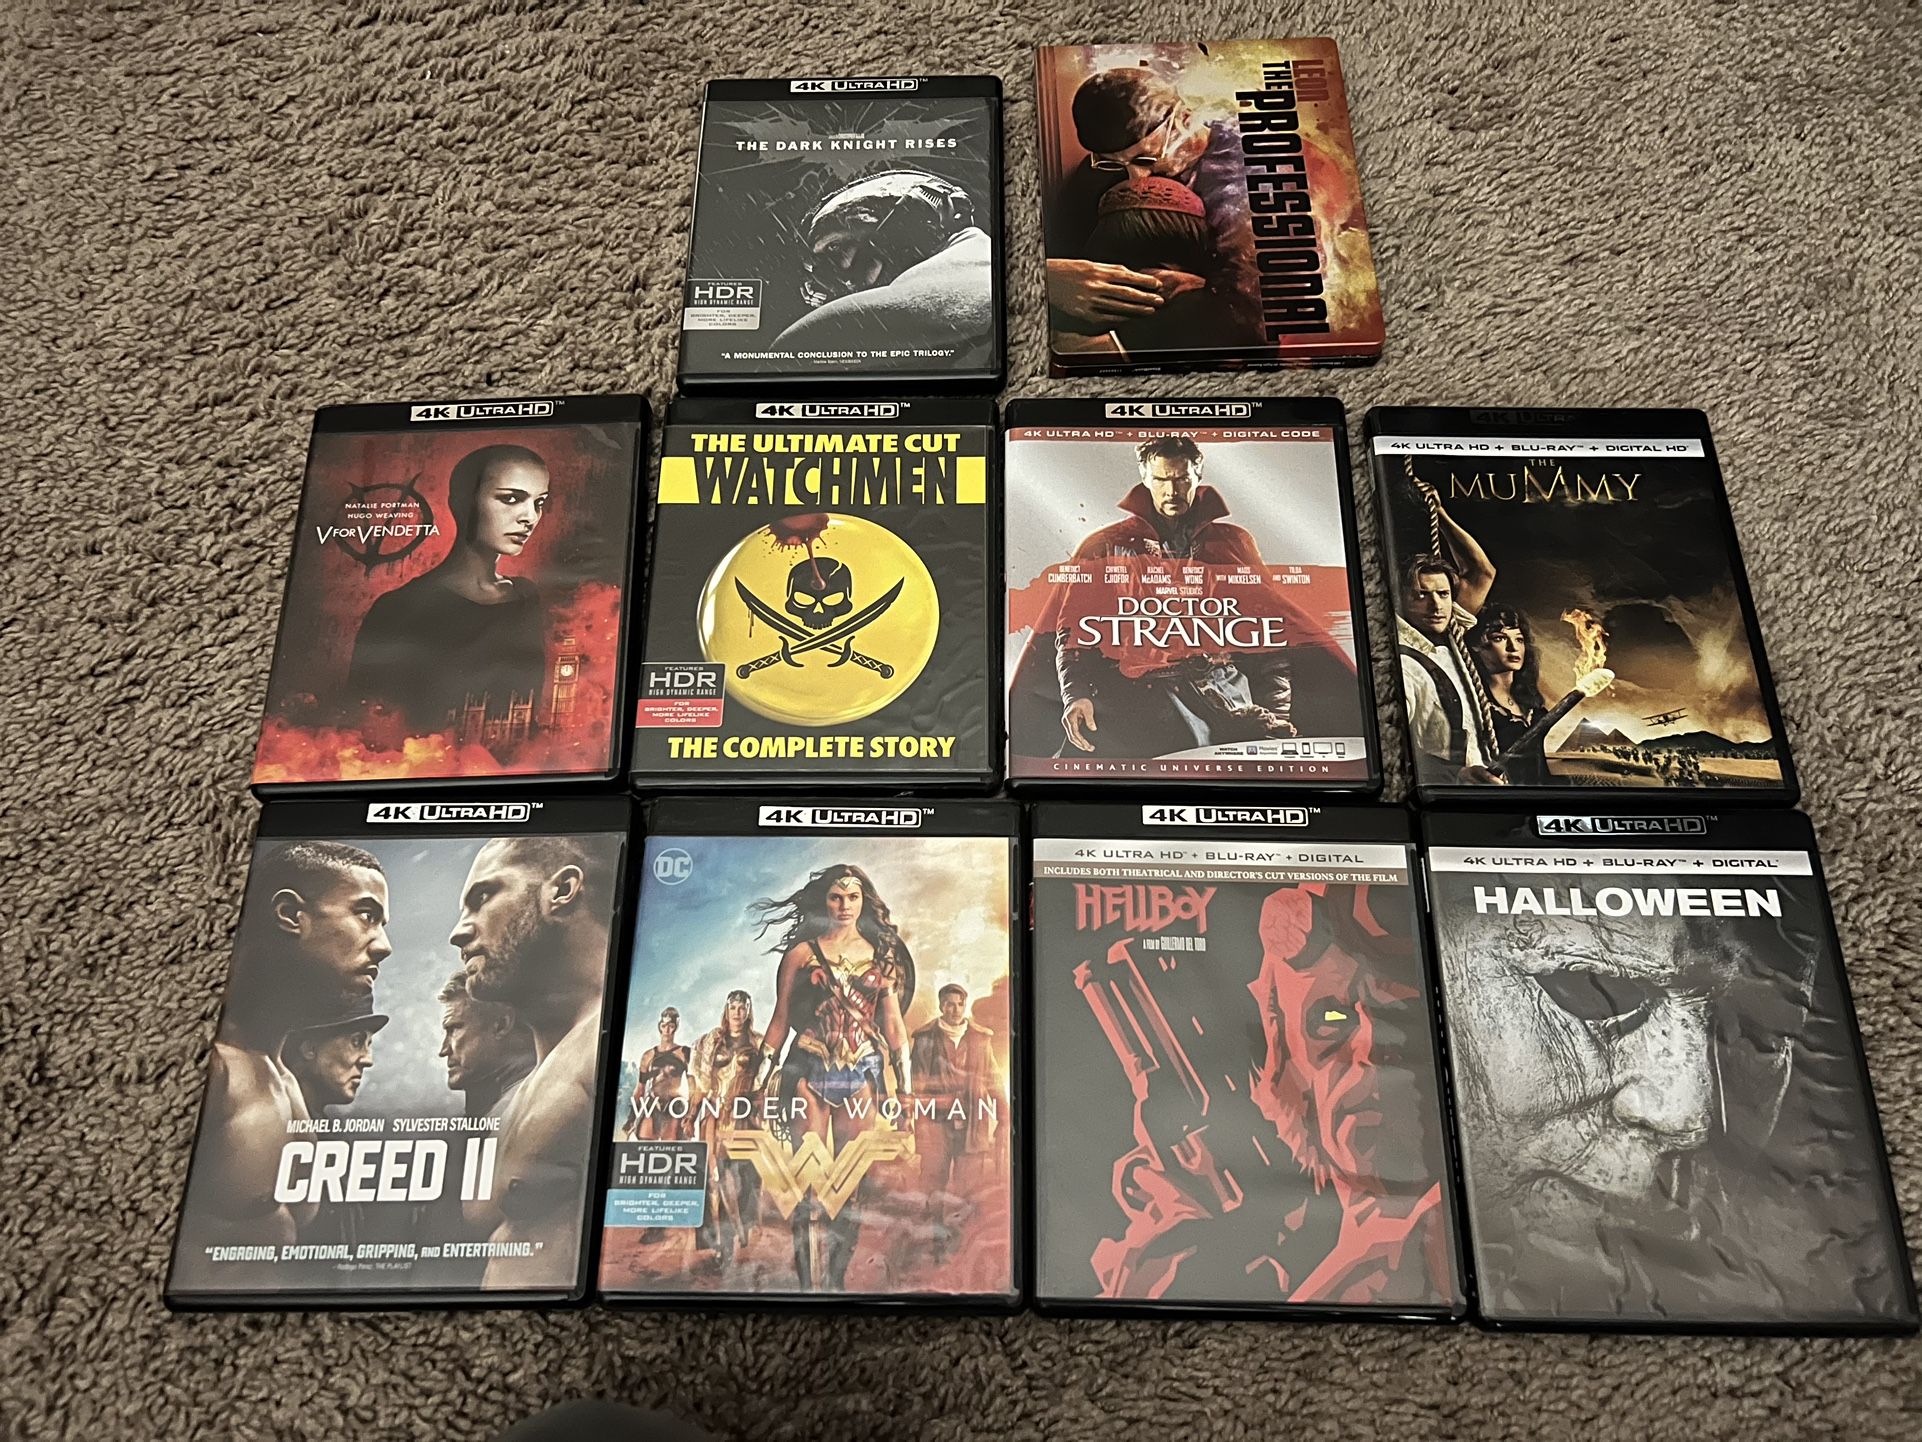 4k Movies/Physical Media